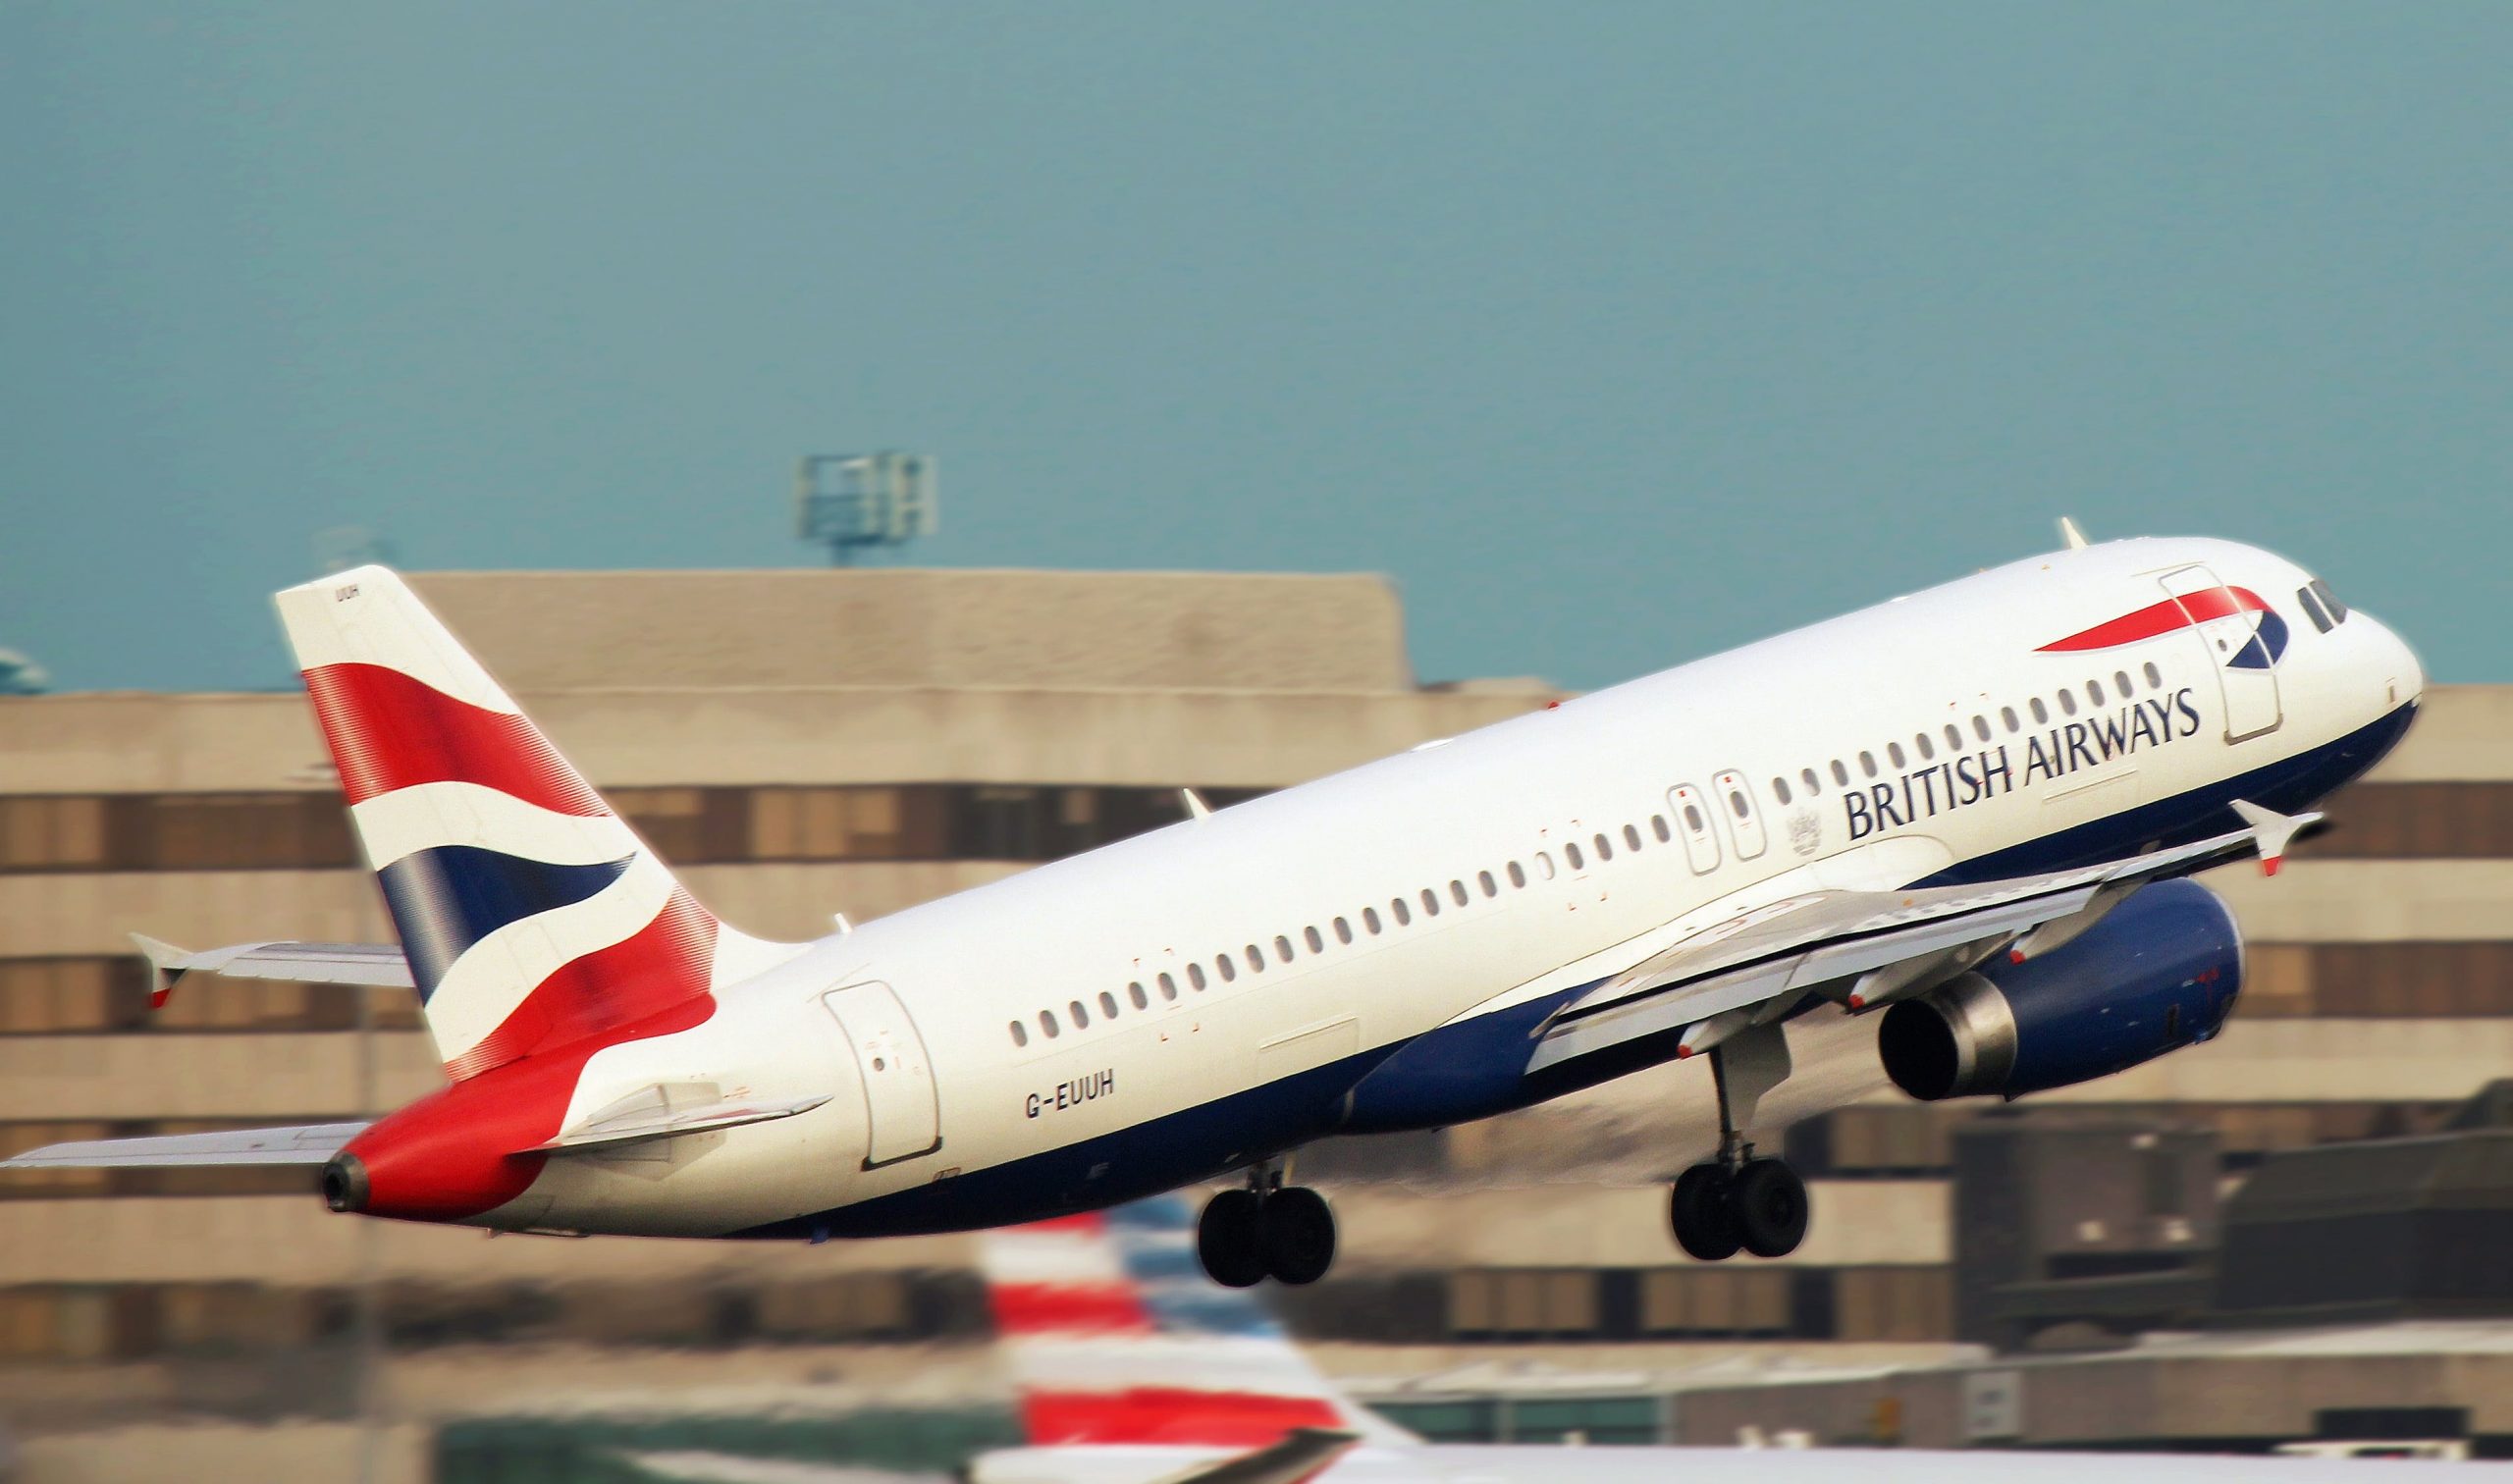 British Airways transport company sanctioned by authorities for inappropriate customer data protection practices